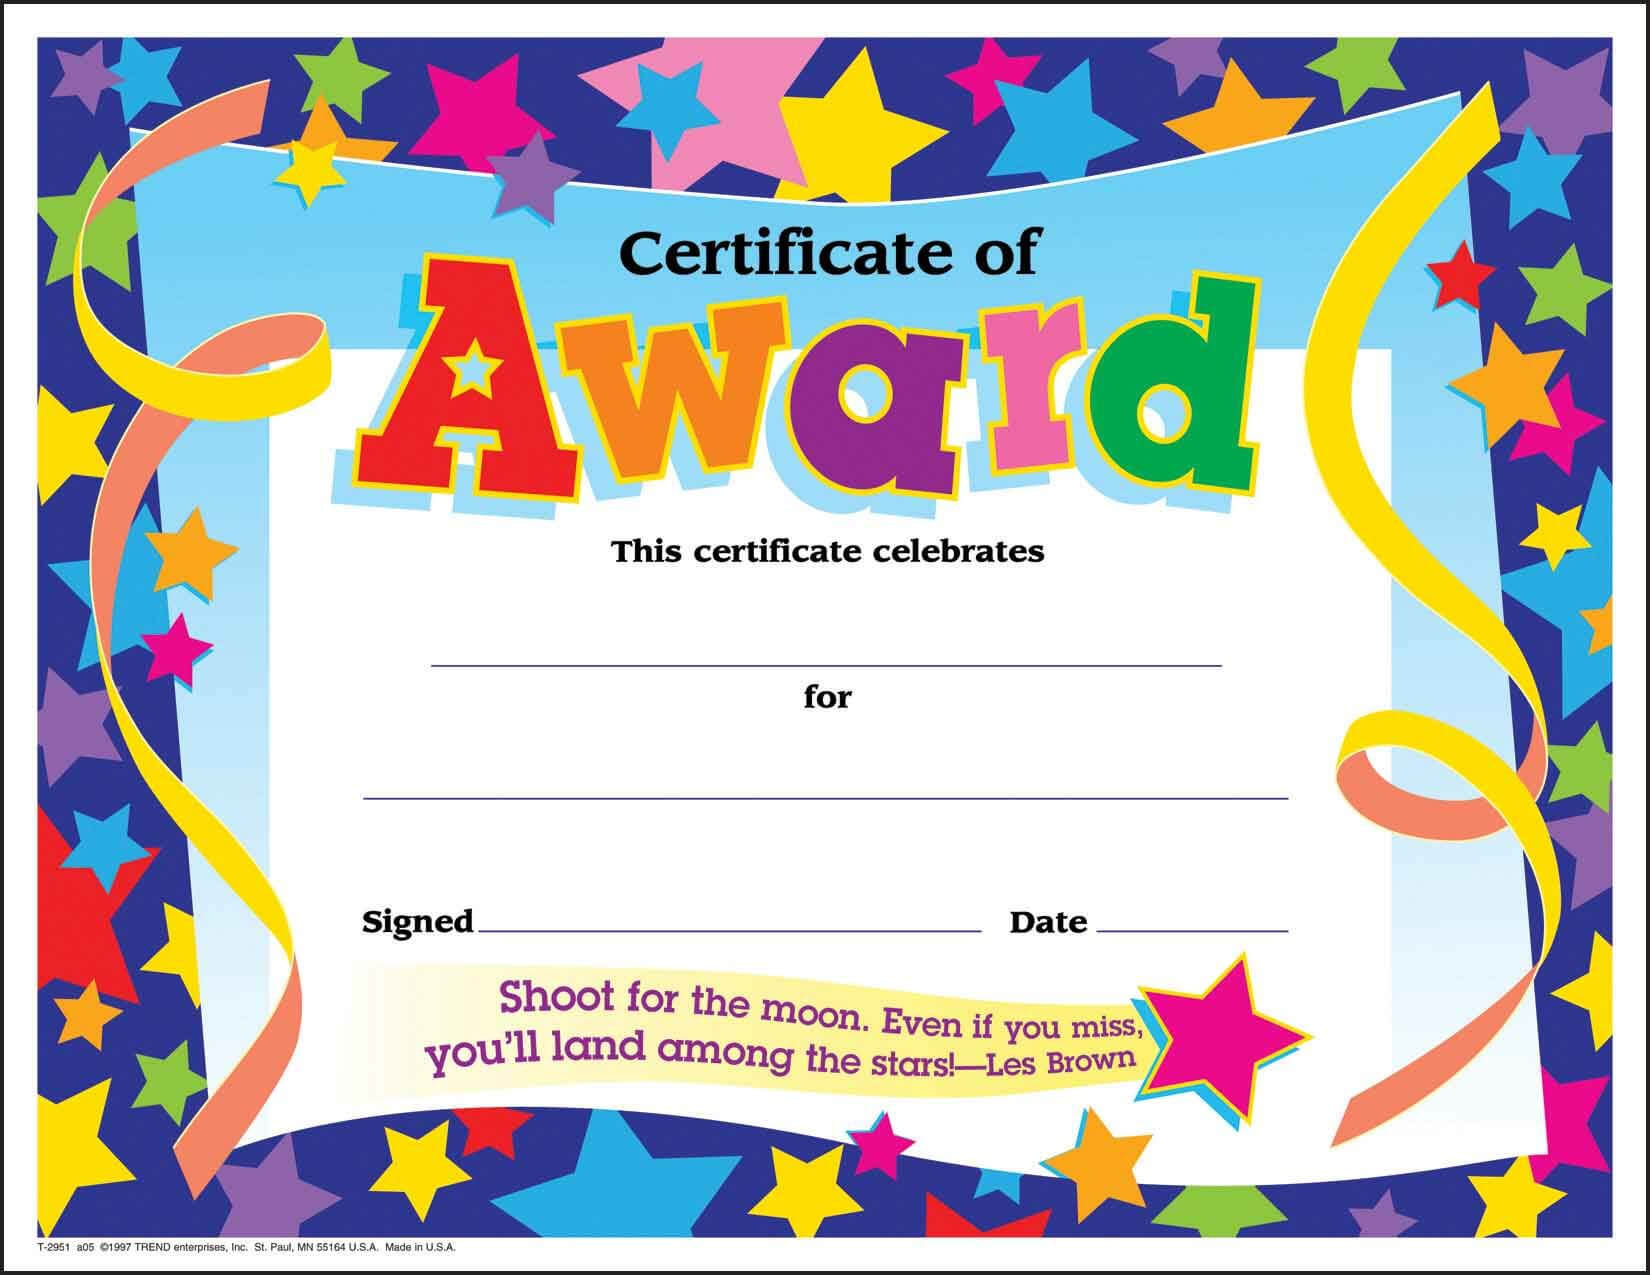 Certificate Template For Kids Free Certificate Templates For Certificate Of Achievement Template For Kids